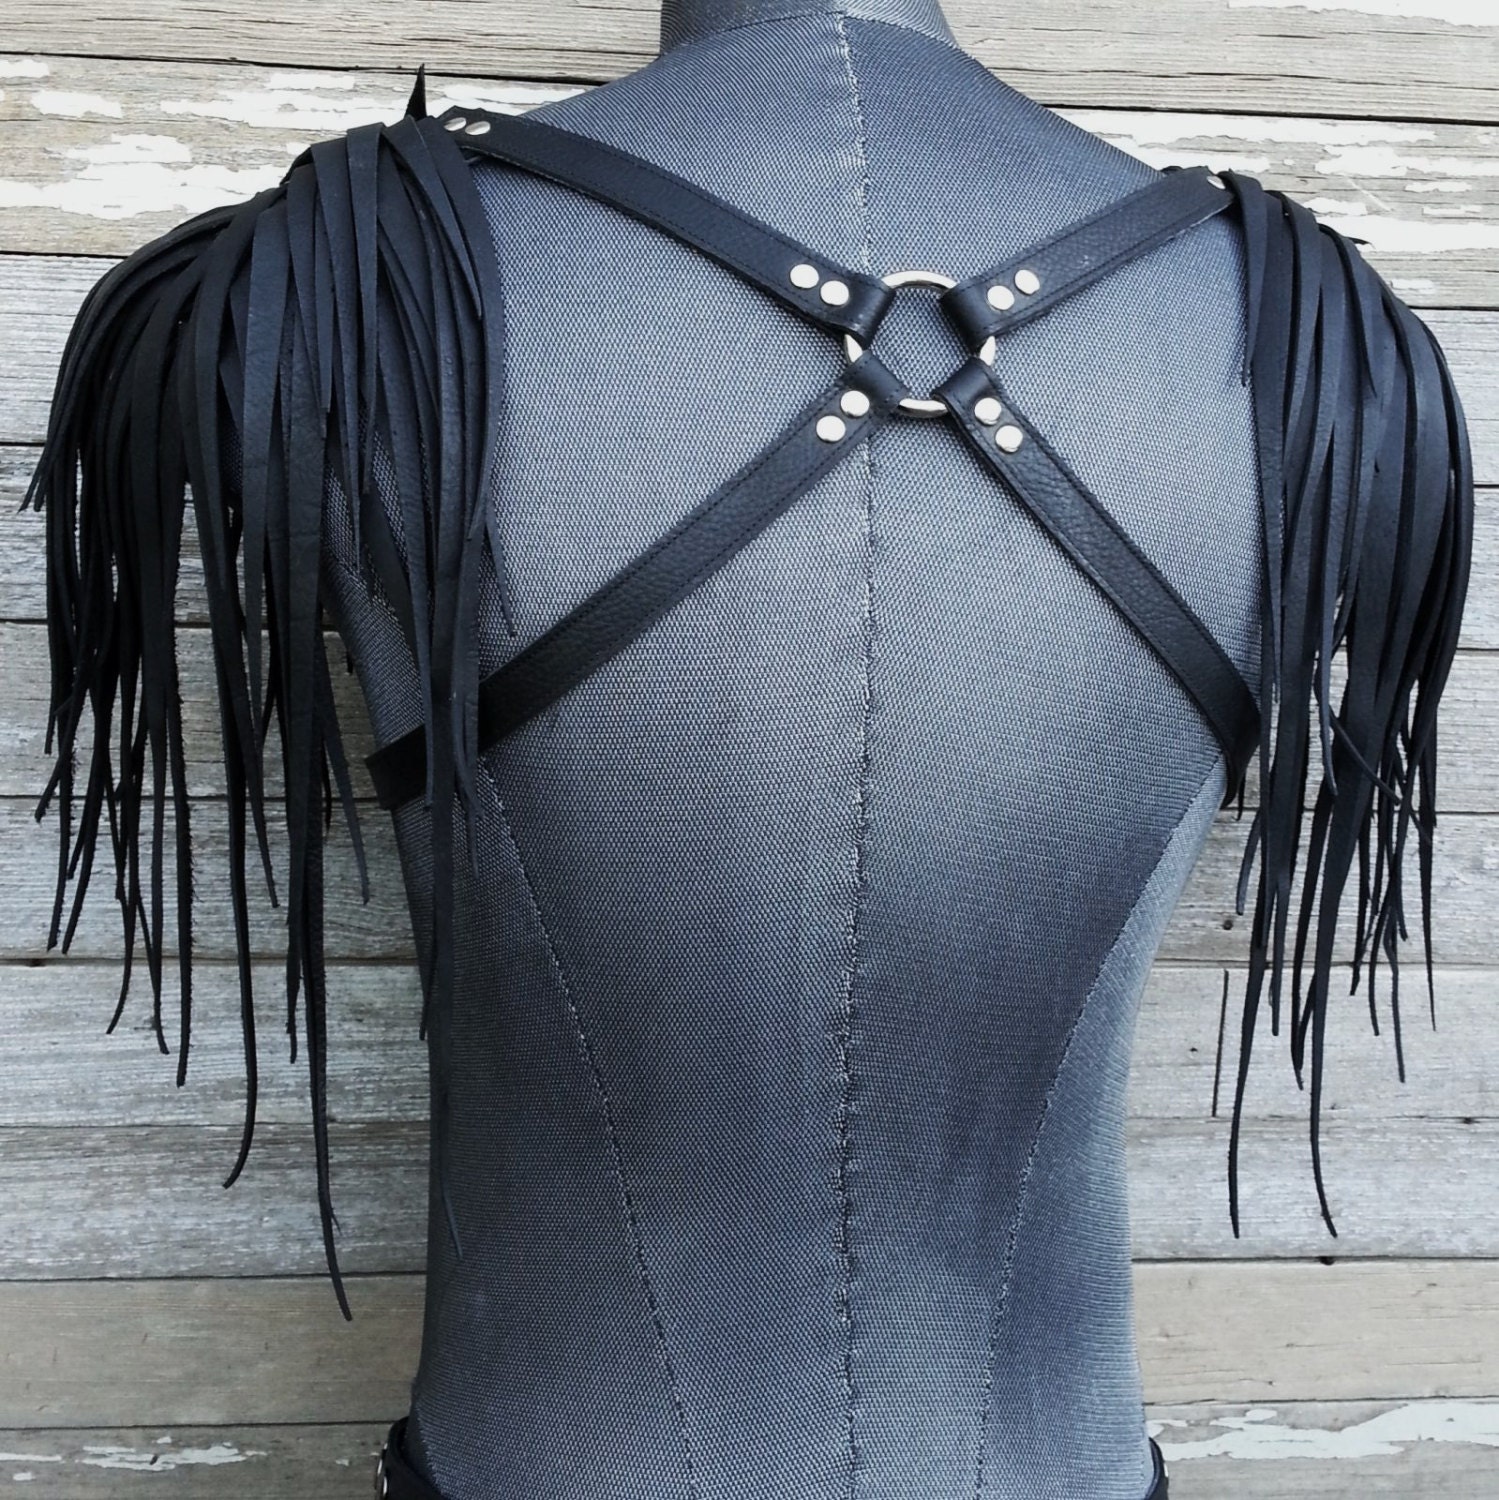 Primitive Feathered Black Leather Unisex Harness with Nickel | Etsy